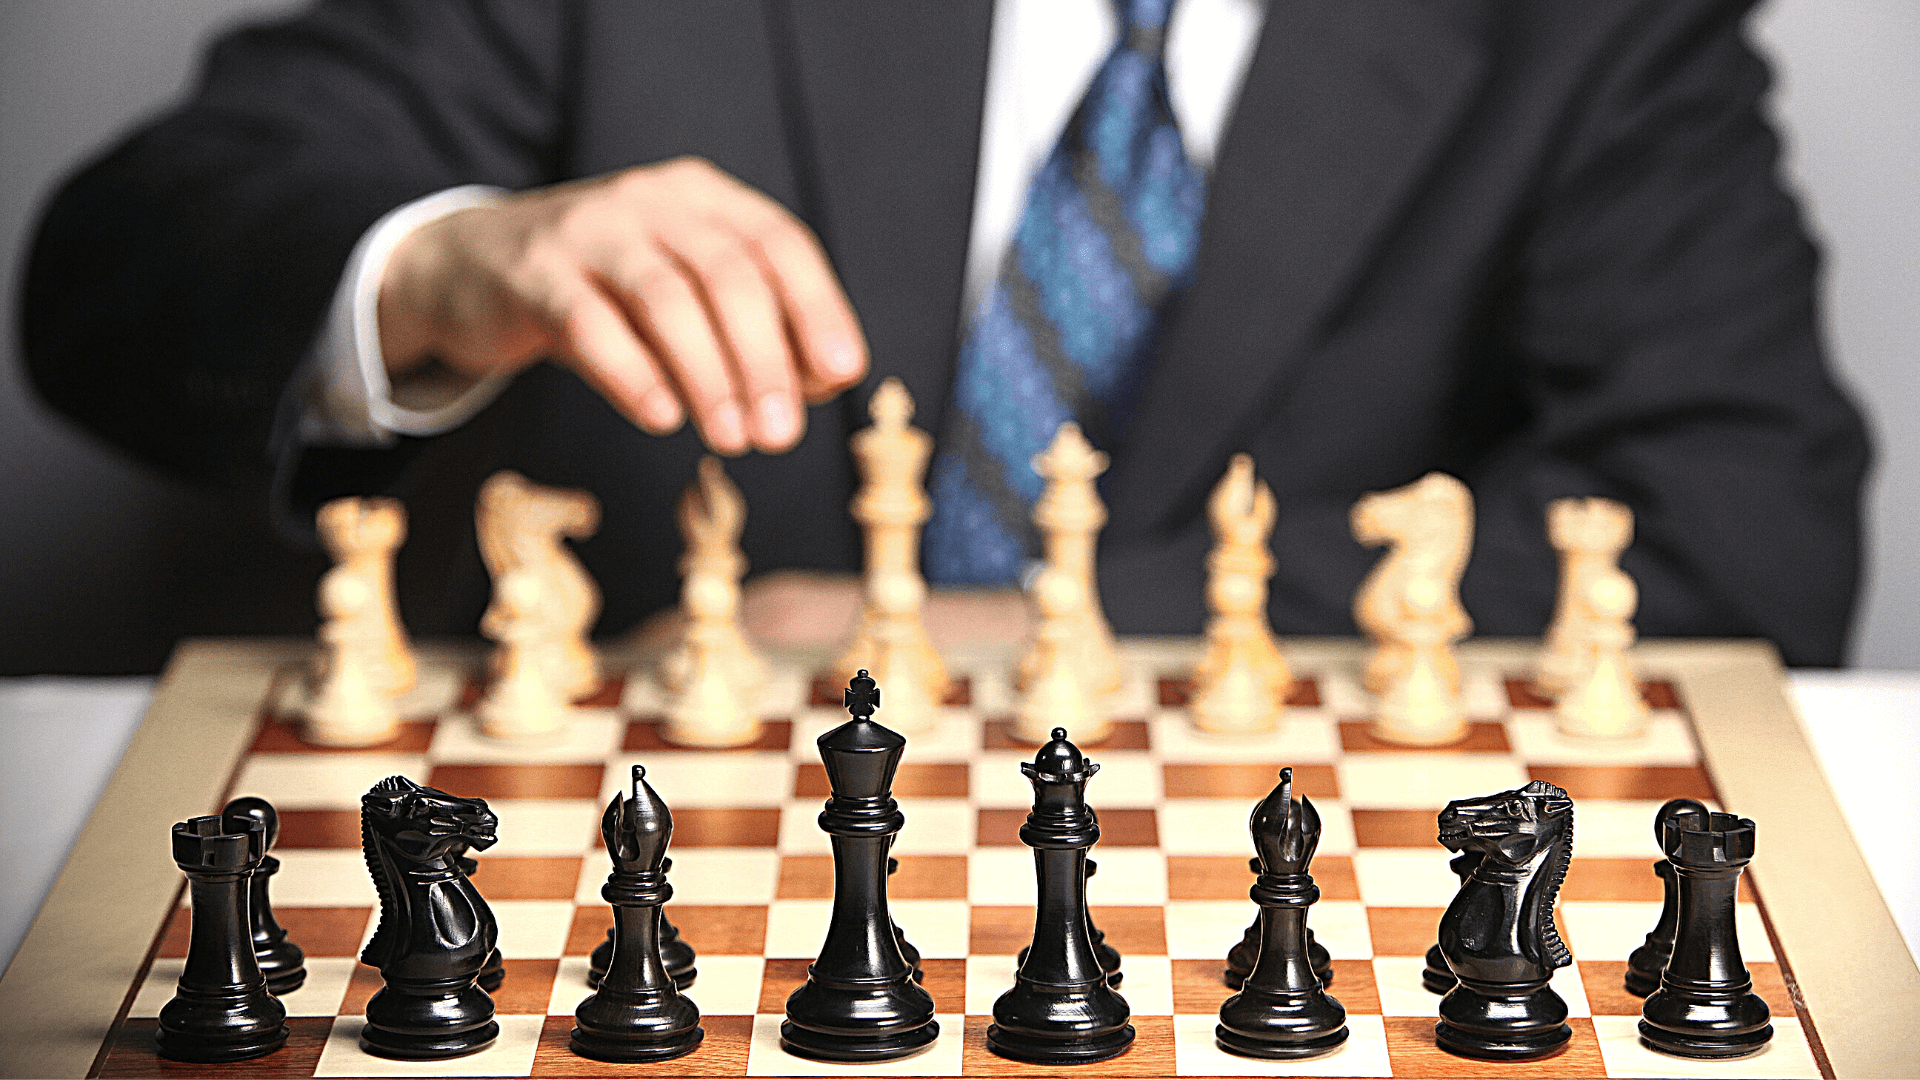 Man in black with a blue tie playing chess, from the opponents viewpoint.